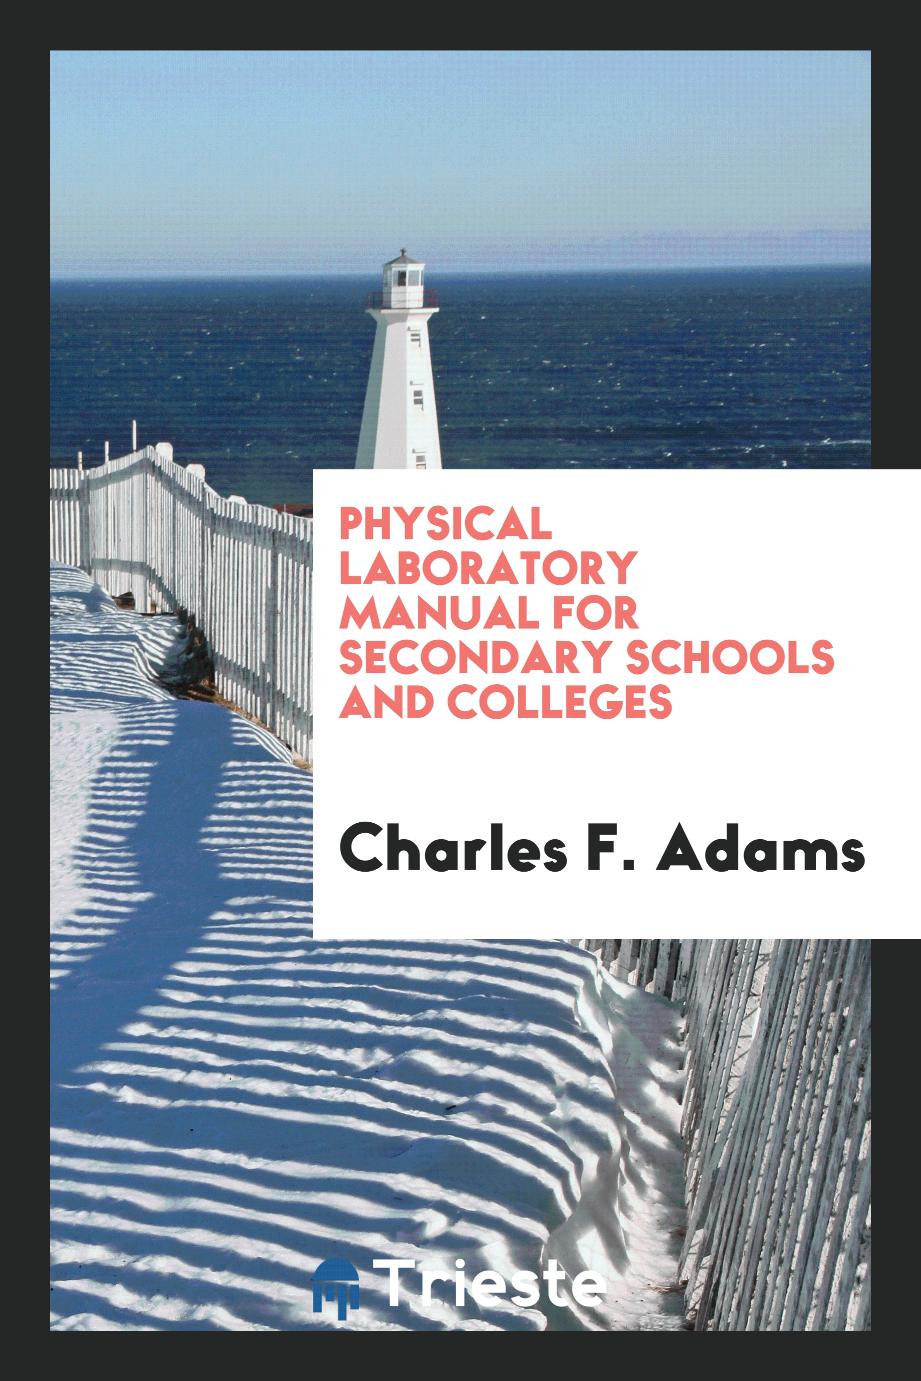 Physical Laboratory Manual for Secondary Schools and Colleges